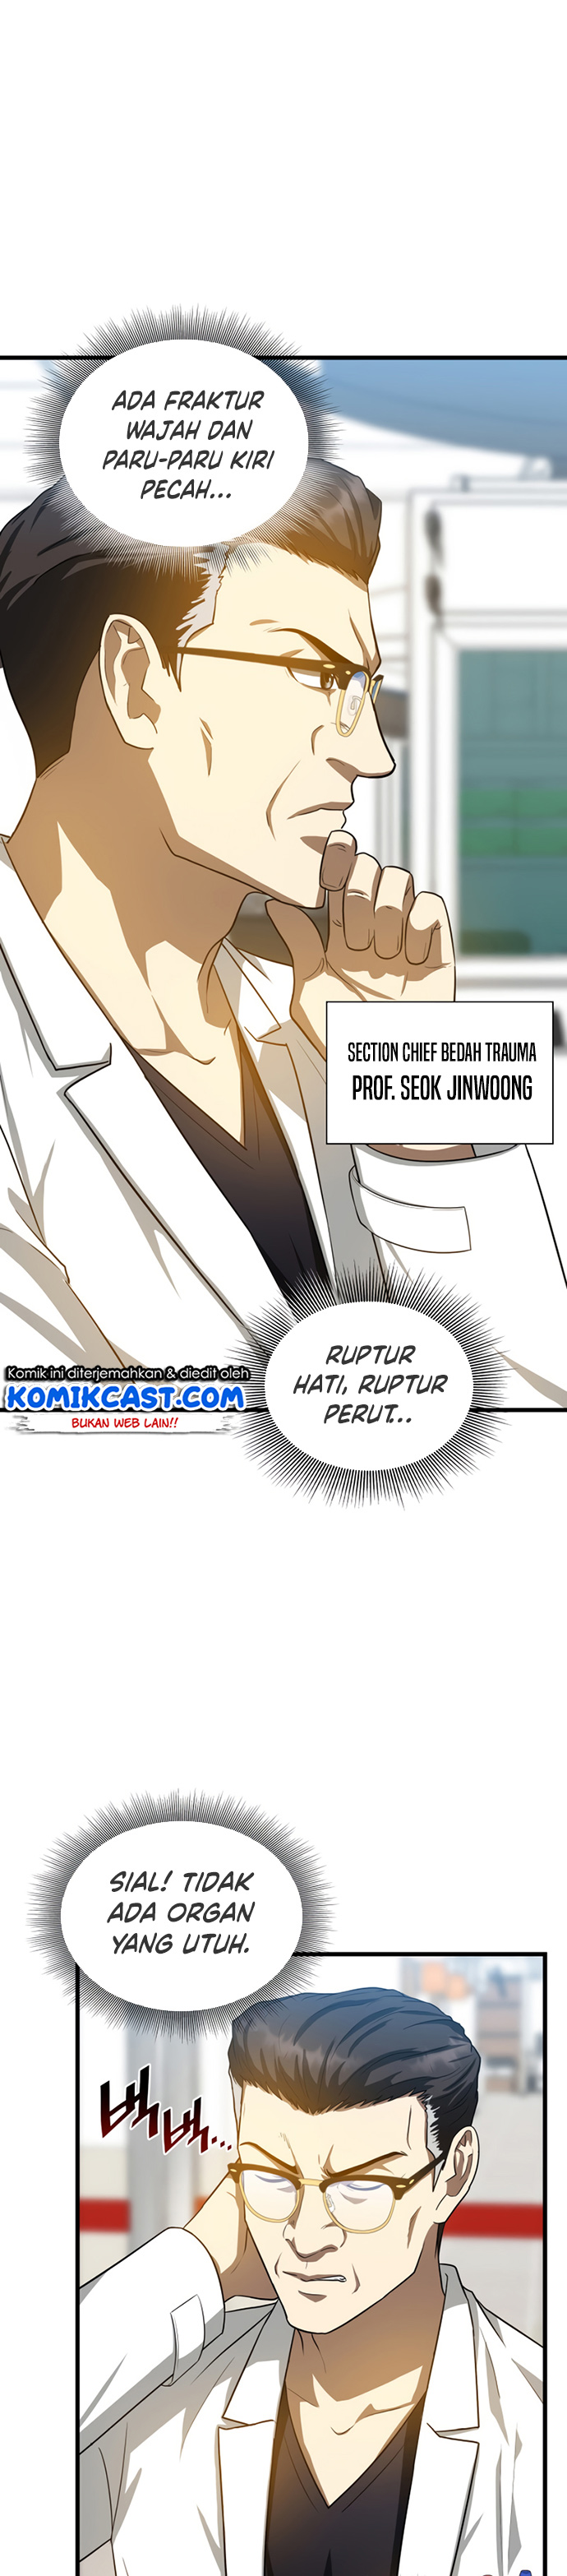 Perfect Surgeon Chapter 13 27